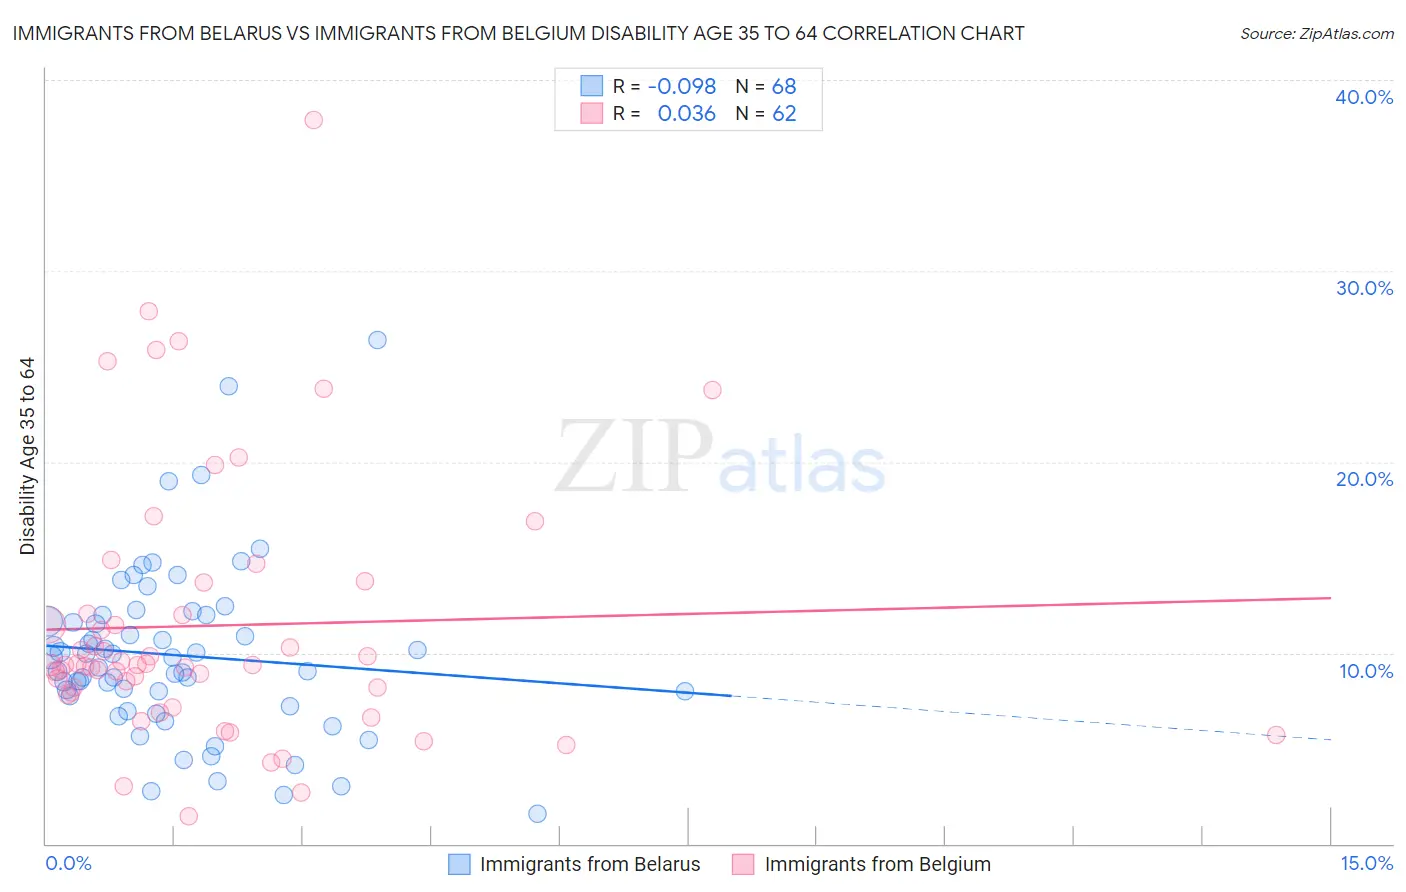 Immigrants from Belarus vs Immigrants from Belgium Disability Age 35 to 64